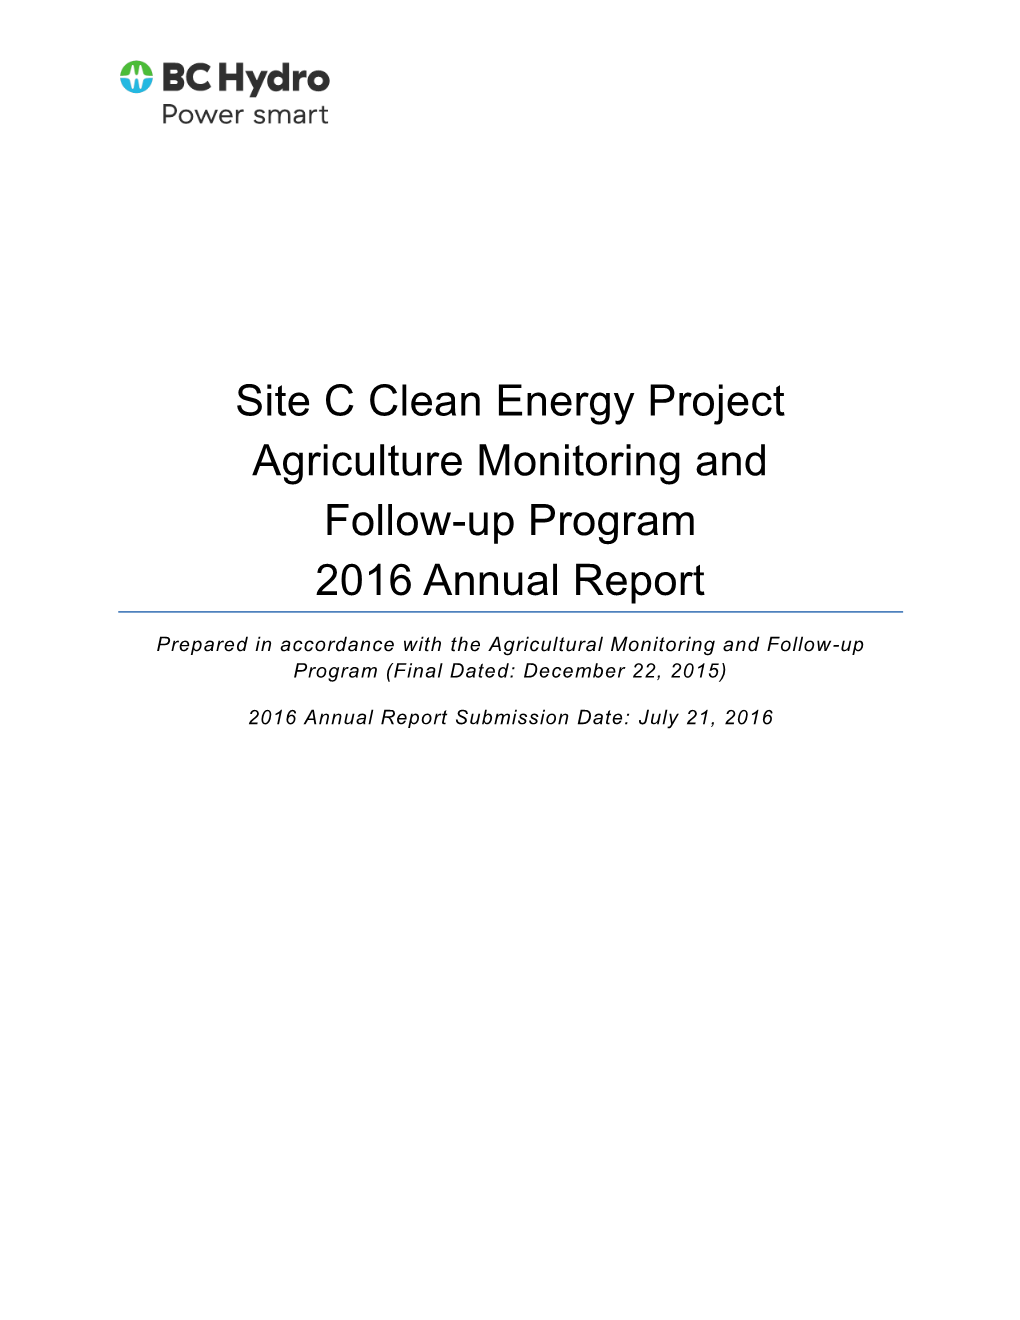 Agriculture Monitoring and Follow-Up Program 2016 Annual Report